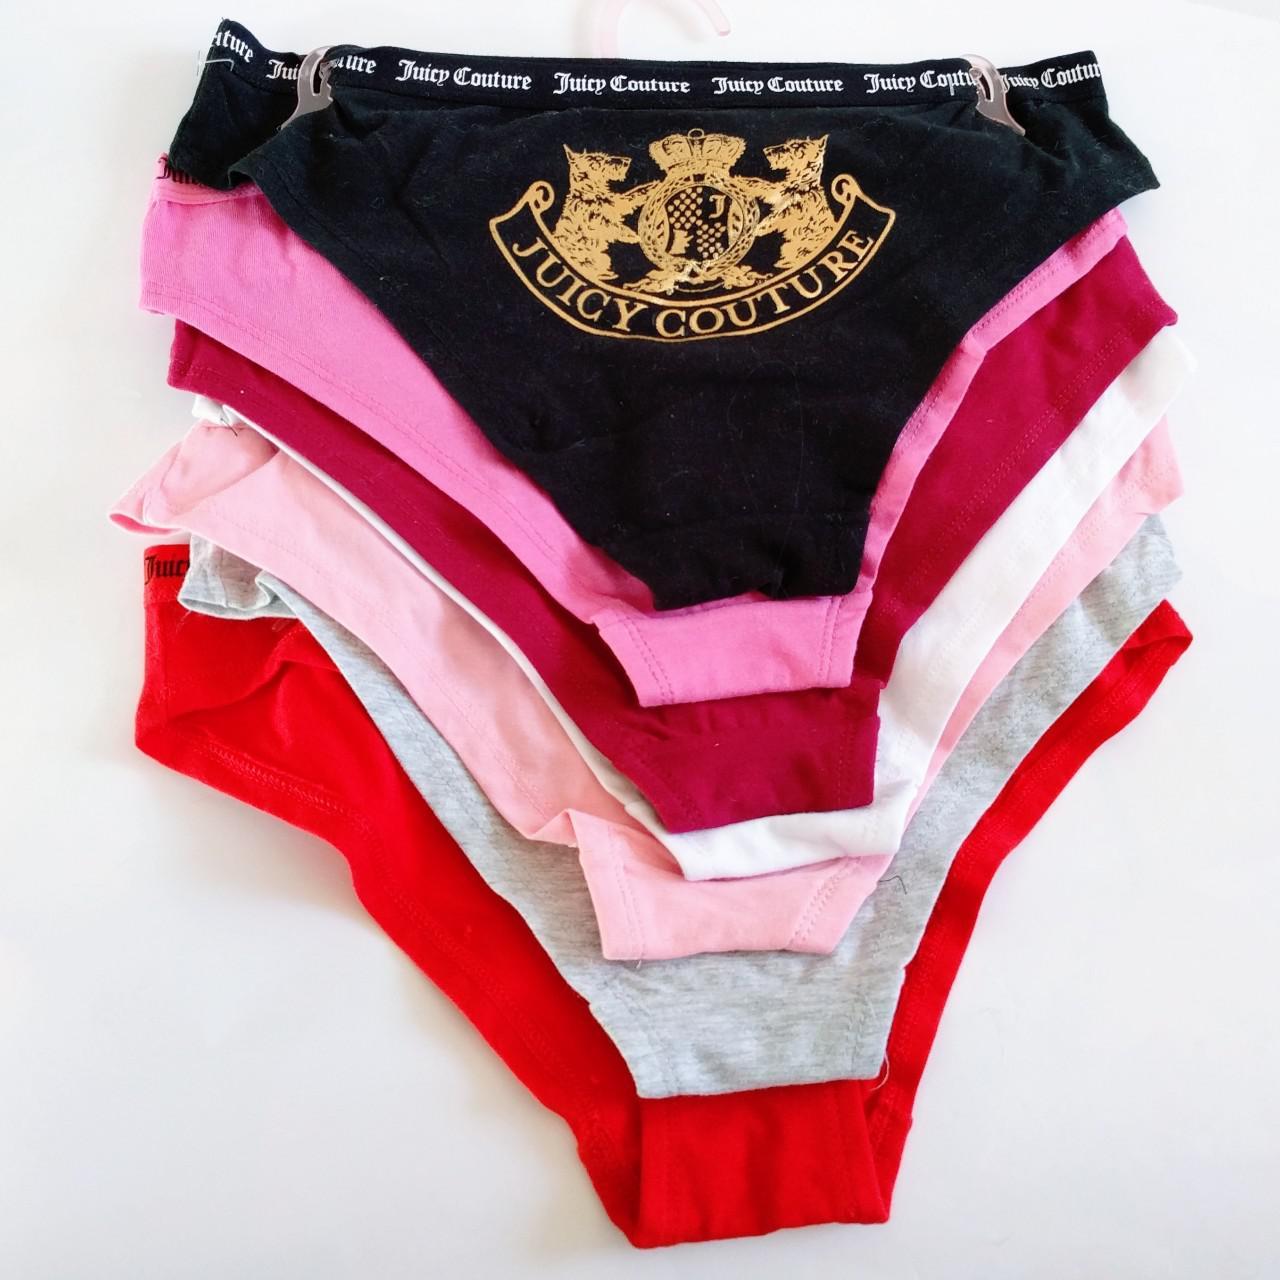 Available Authentic Juicy Couture Underwear $1000 Each 🔥🔥🚫SOLD🚫 Size  Large Only!!! DM Or Wattsapp To Order Yours *No Copy